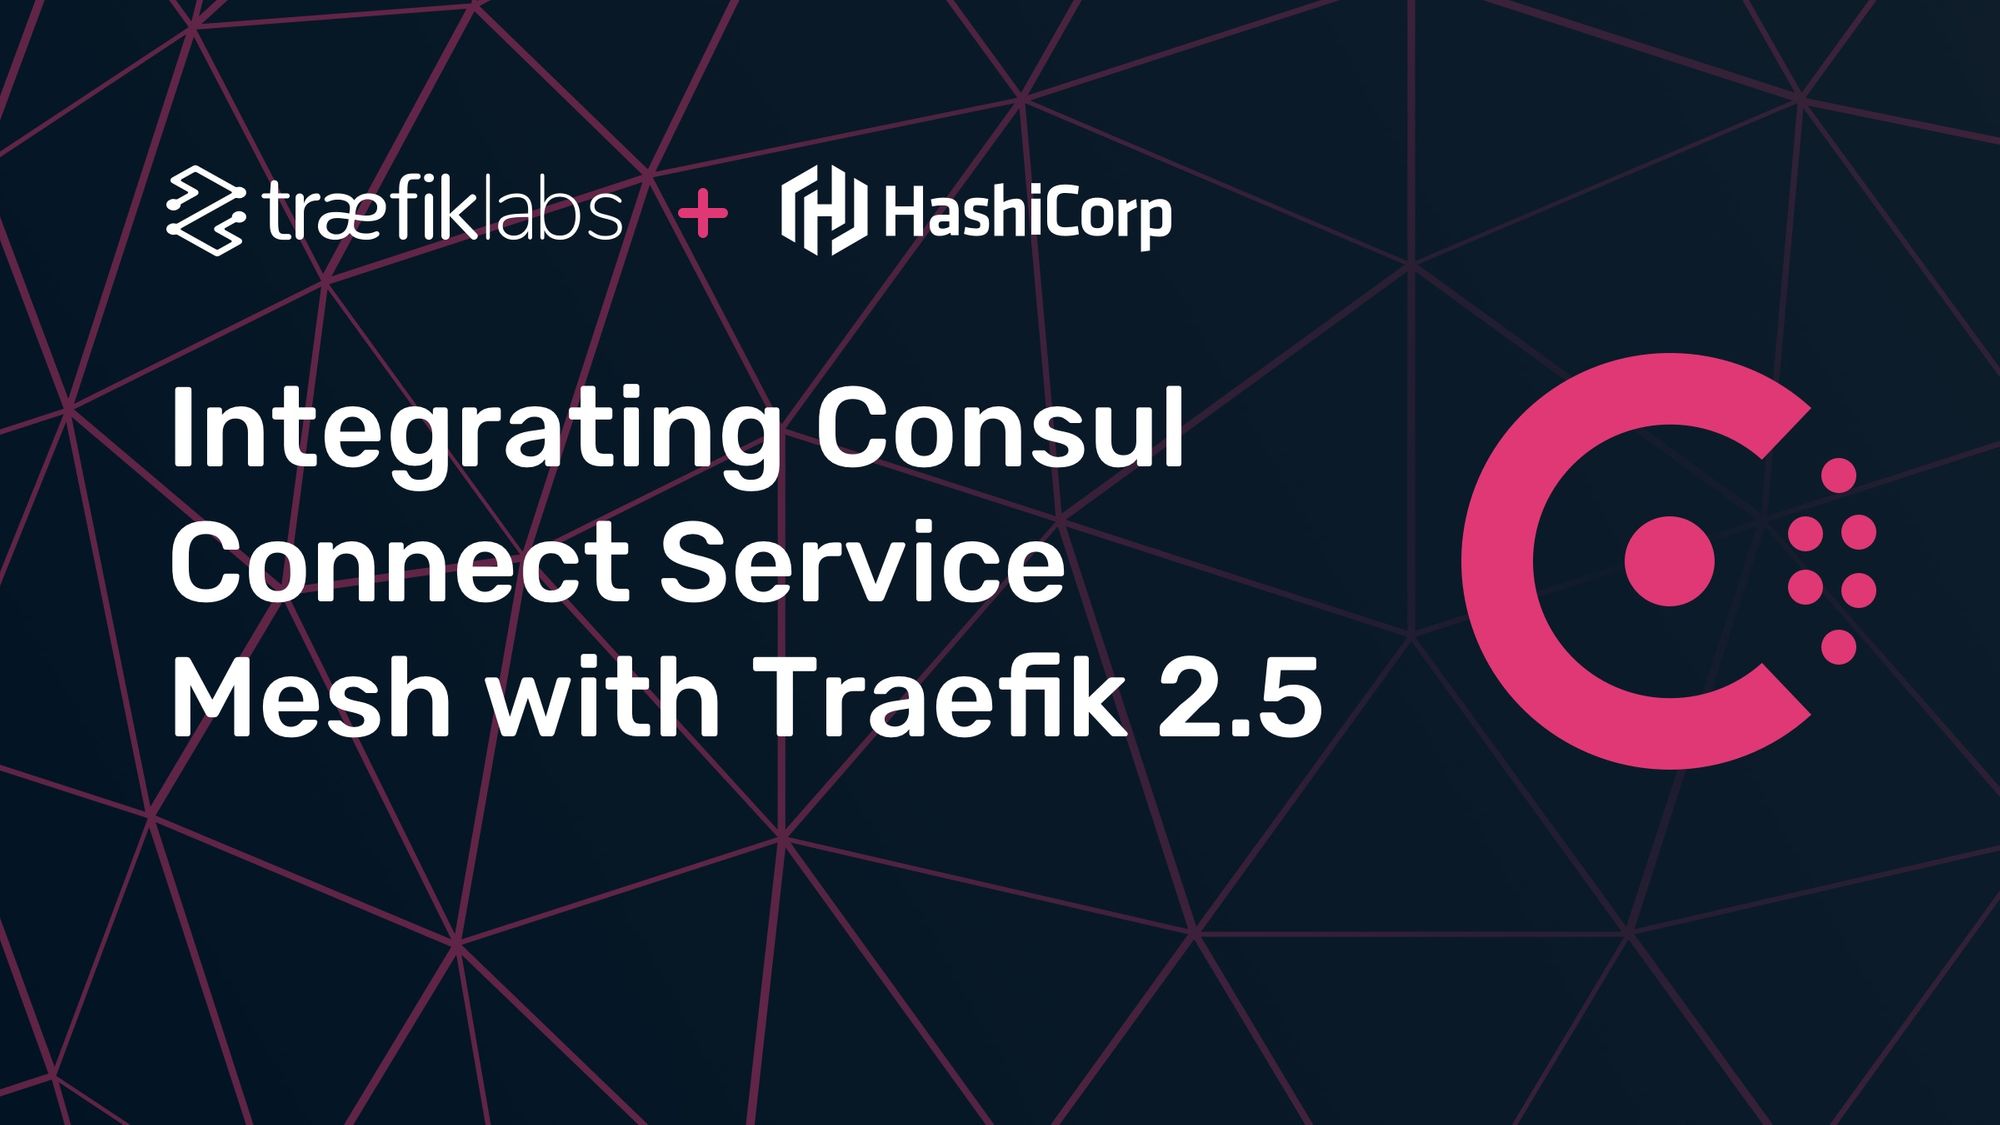 Integrating Consul Connect Service Mesh with Traefik 2.5